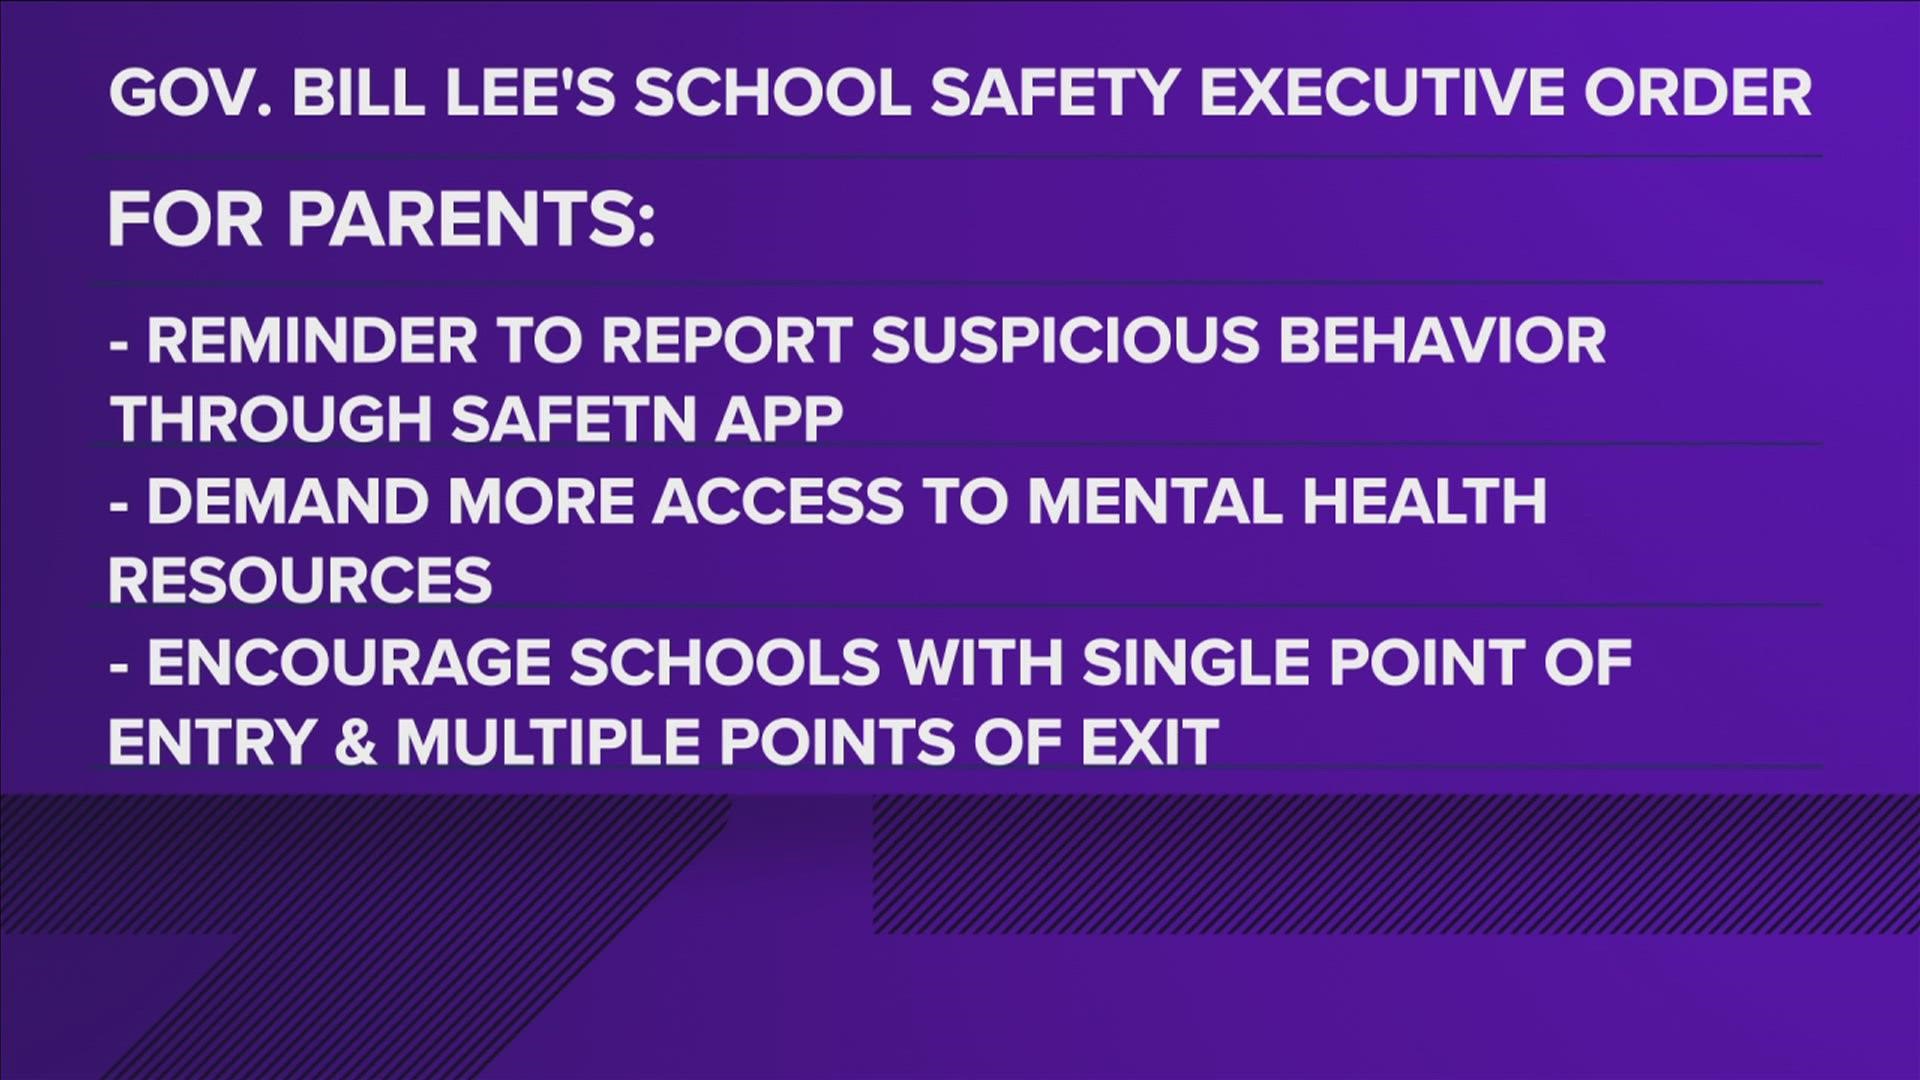 Governor Bill Lee has signed Executive Order 97, which aims to improve school safety amidst mass shootings.